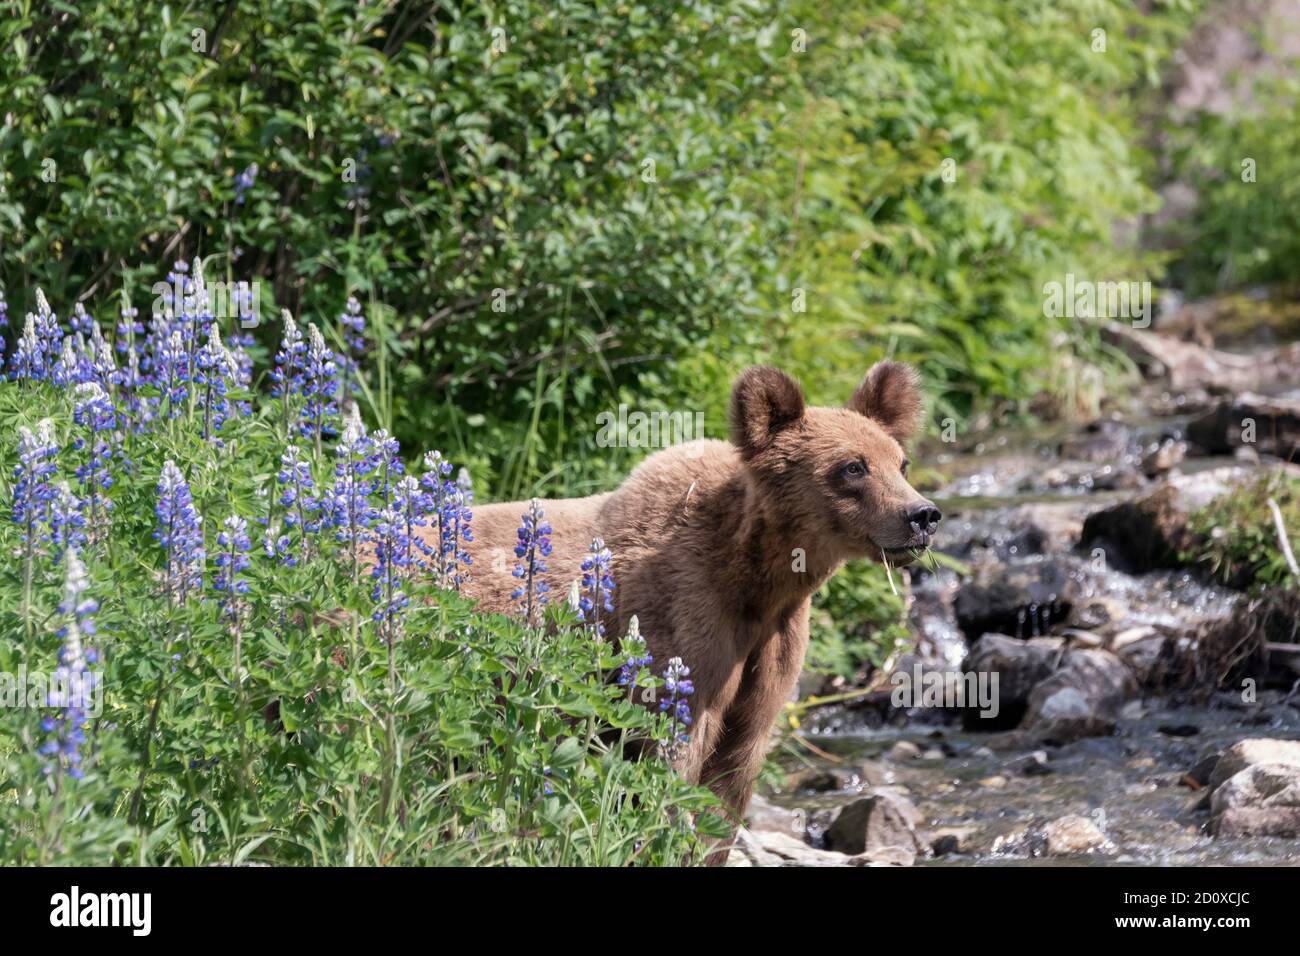 Alert grizzly bear cub eating grass in lupine blossoms, Khutzeymateen, BC Stock Photo